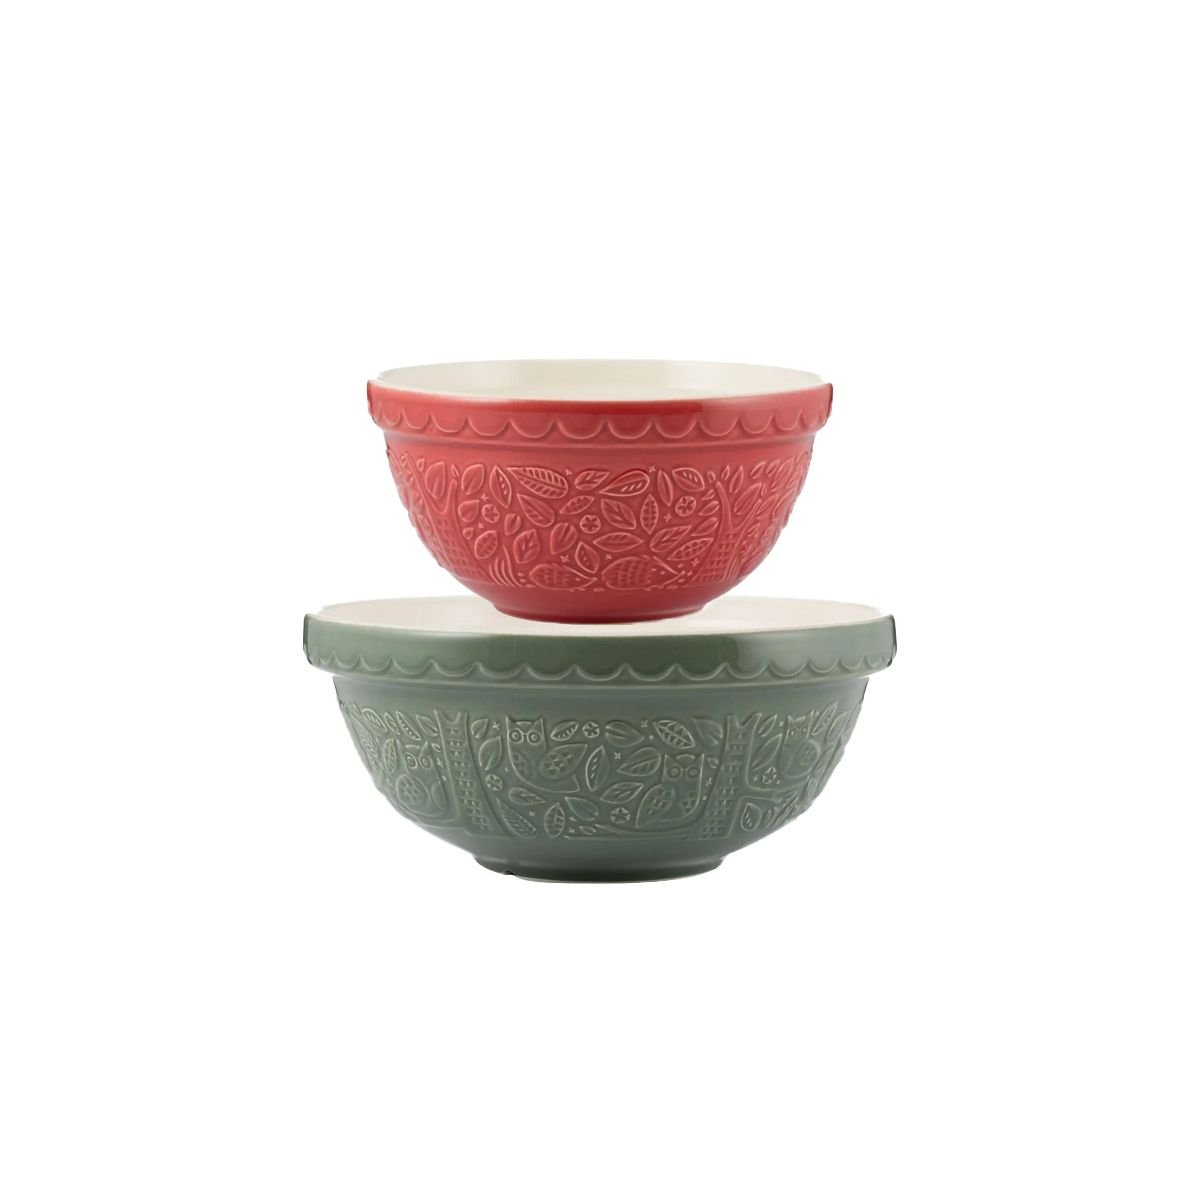 Mason Cash In the Forest Holiday Mixing Bowl Set